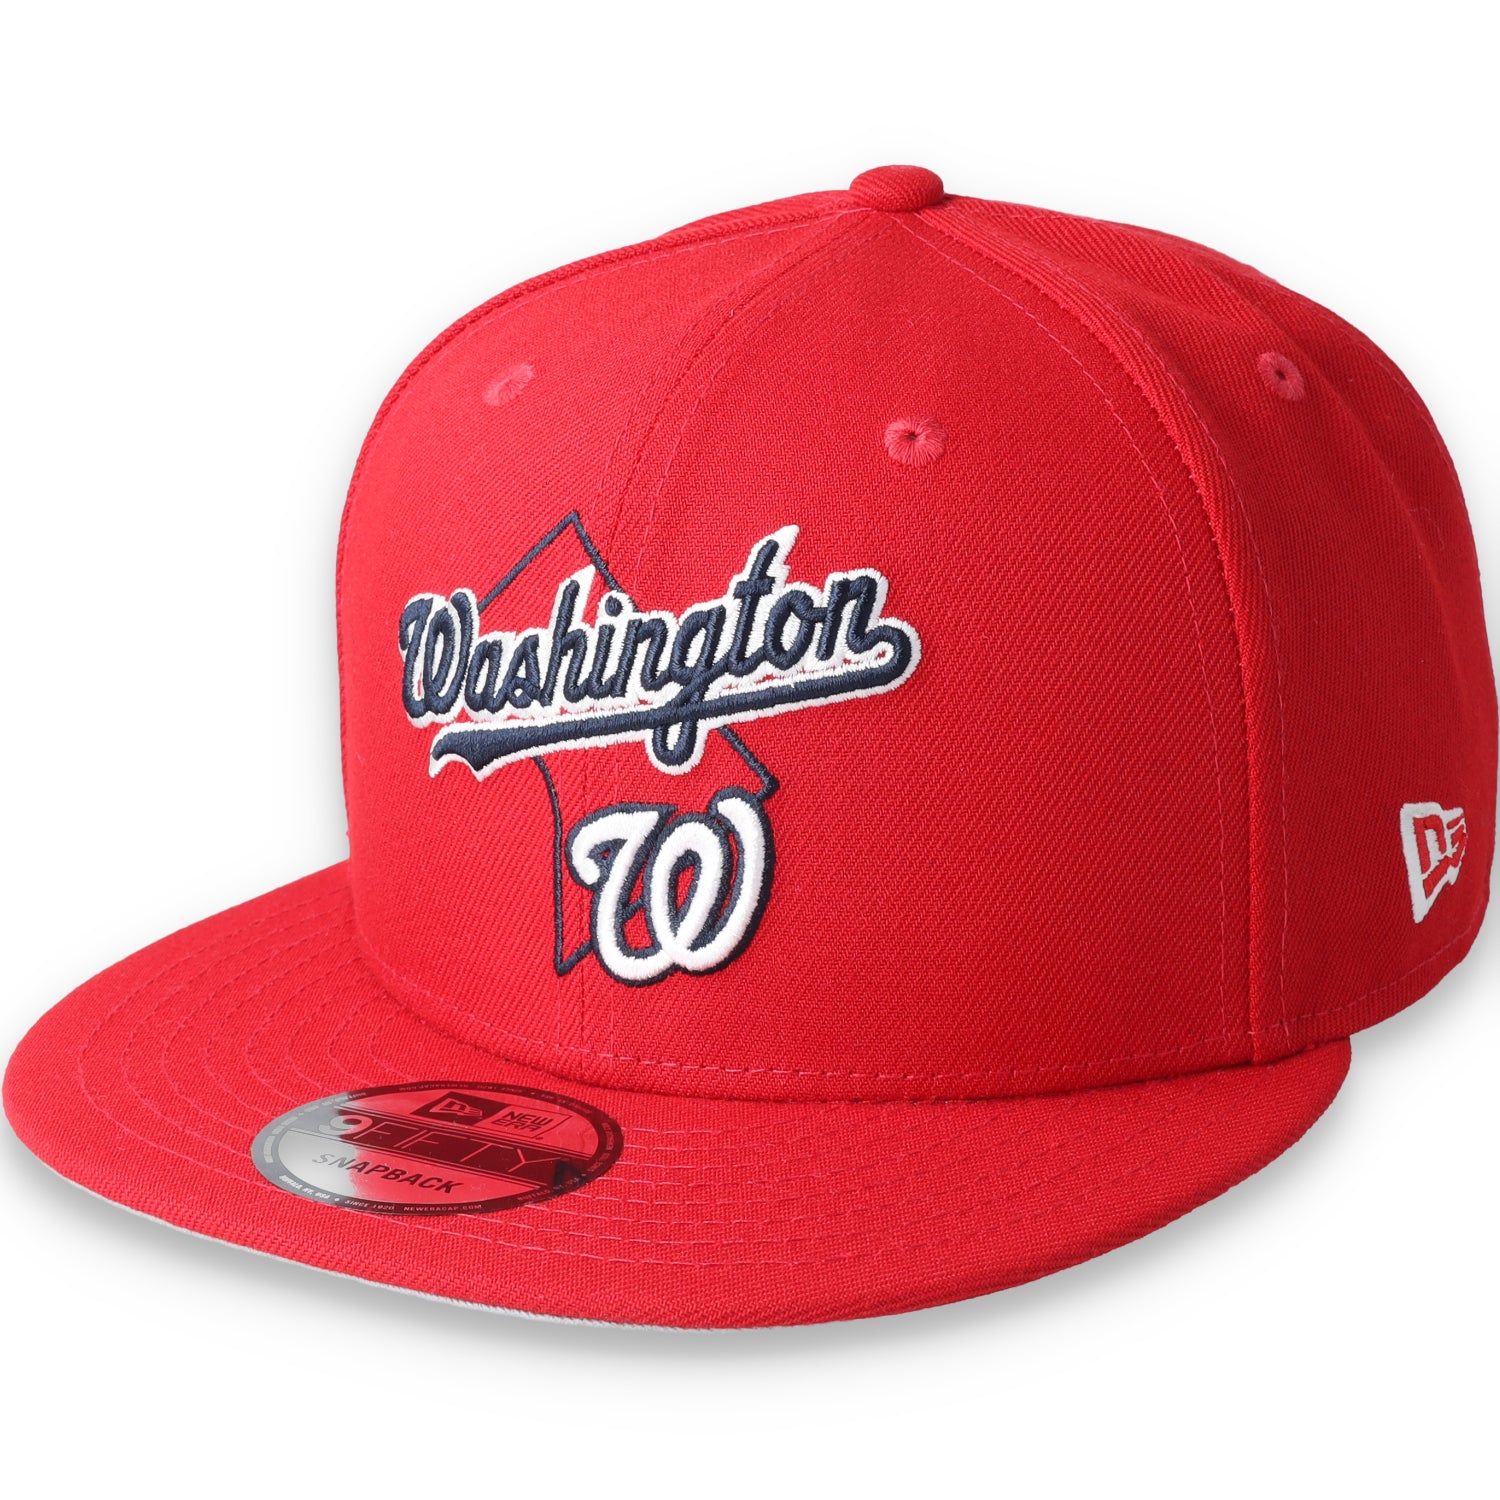 New Era Washington Nationals Logo State 9FIFTY Fitted Hat